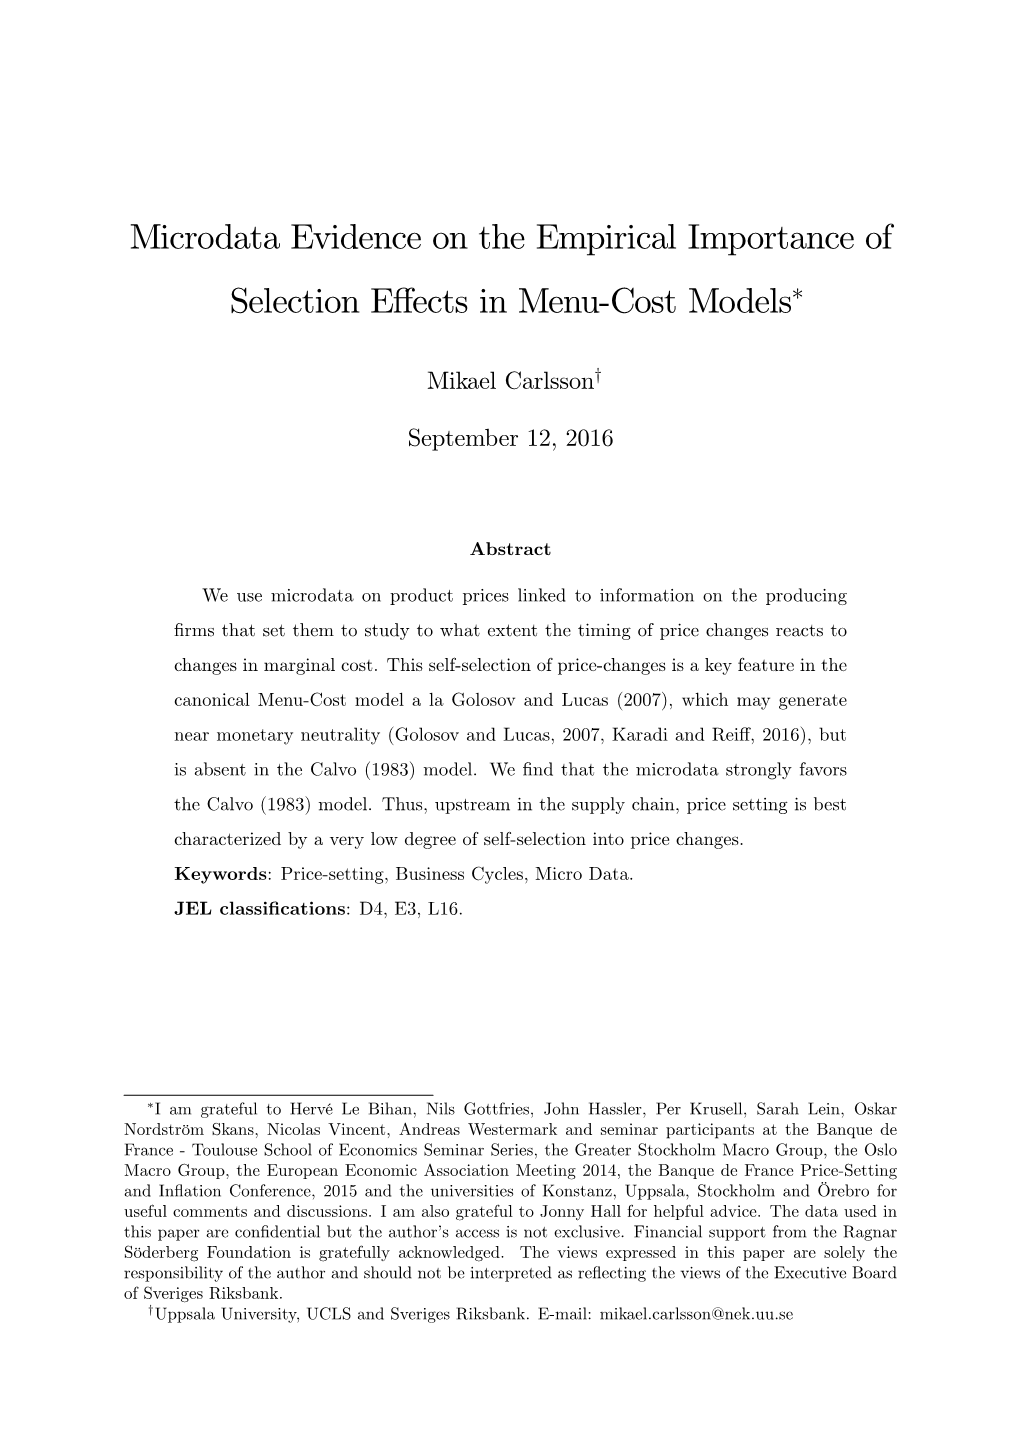 Microdata Evidence on the Empirical Importance of Selection Effects In